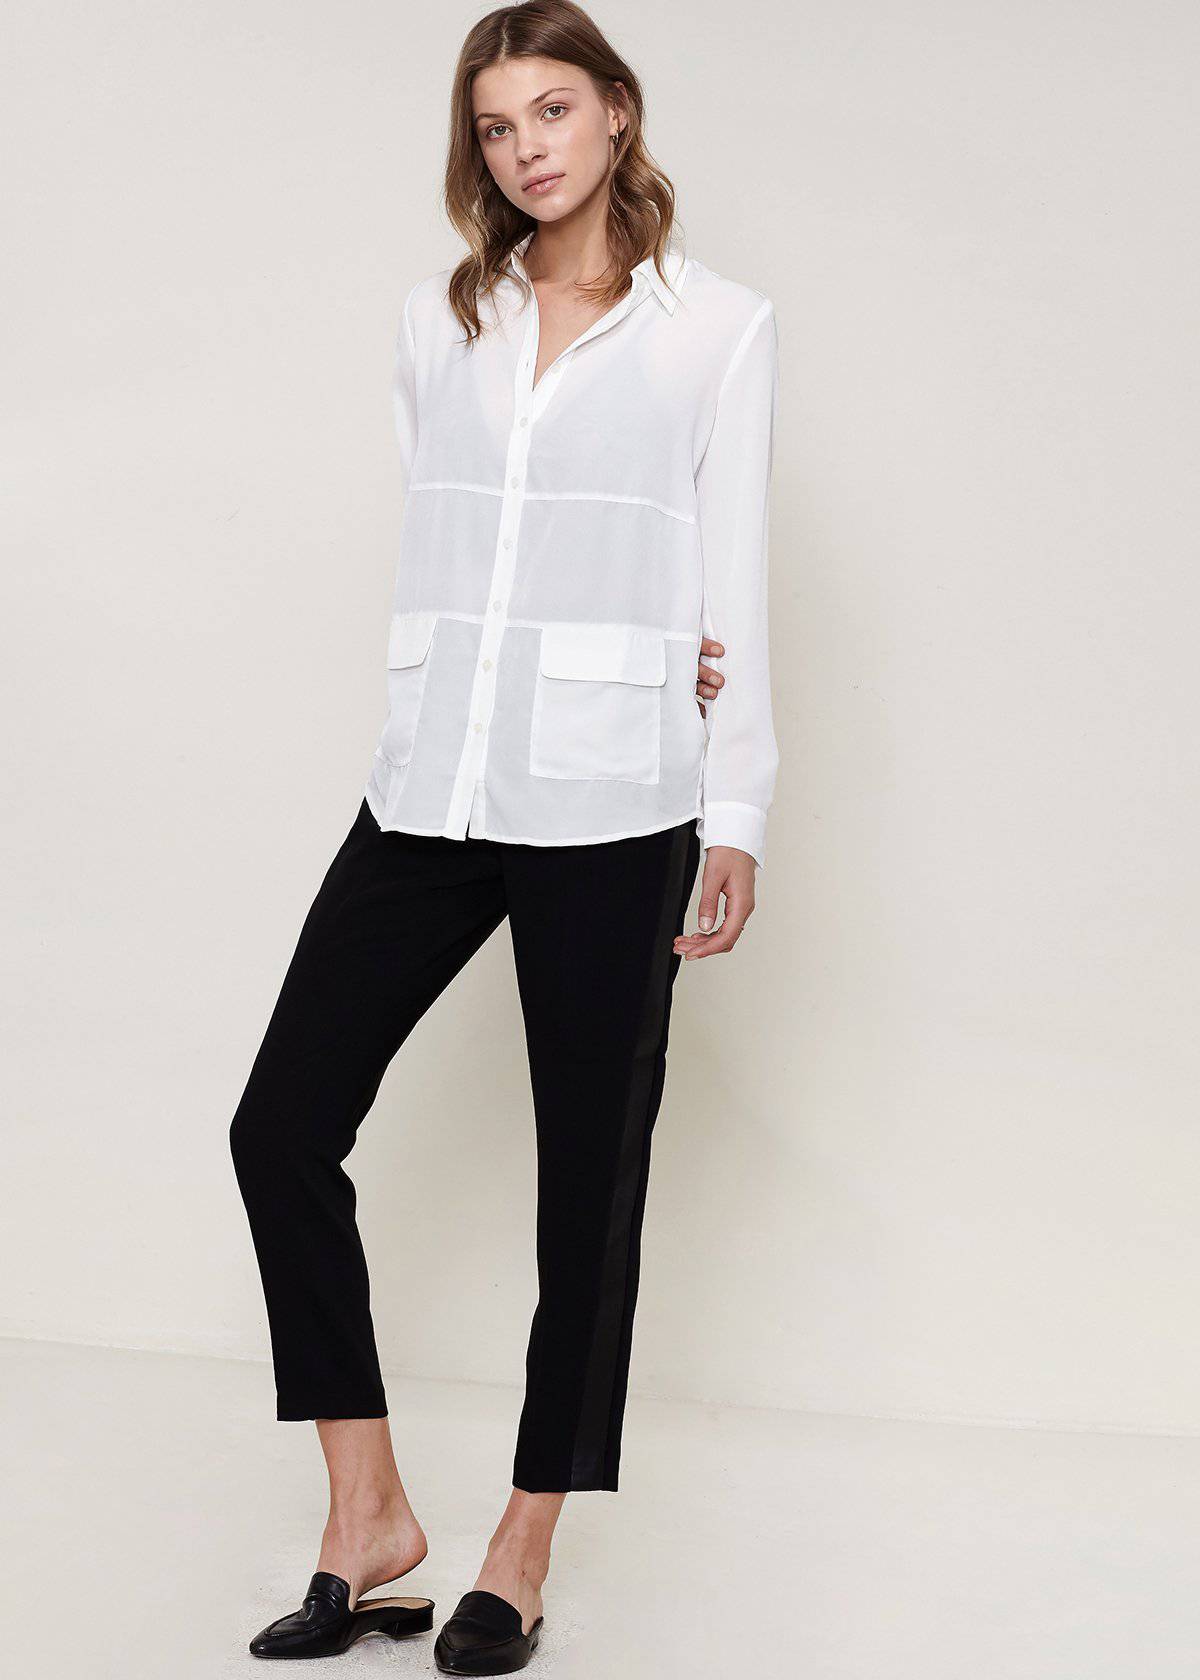 Women's Button Down Pocket Blouse In Ivory by Shop at Konus